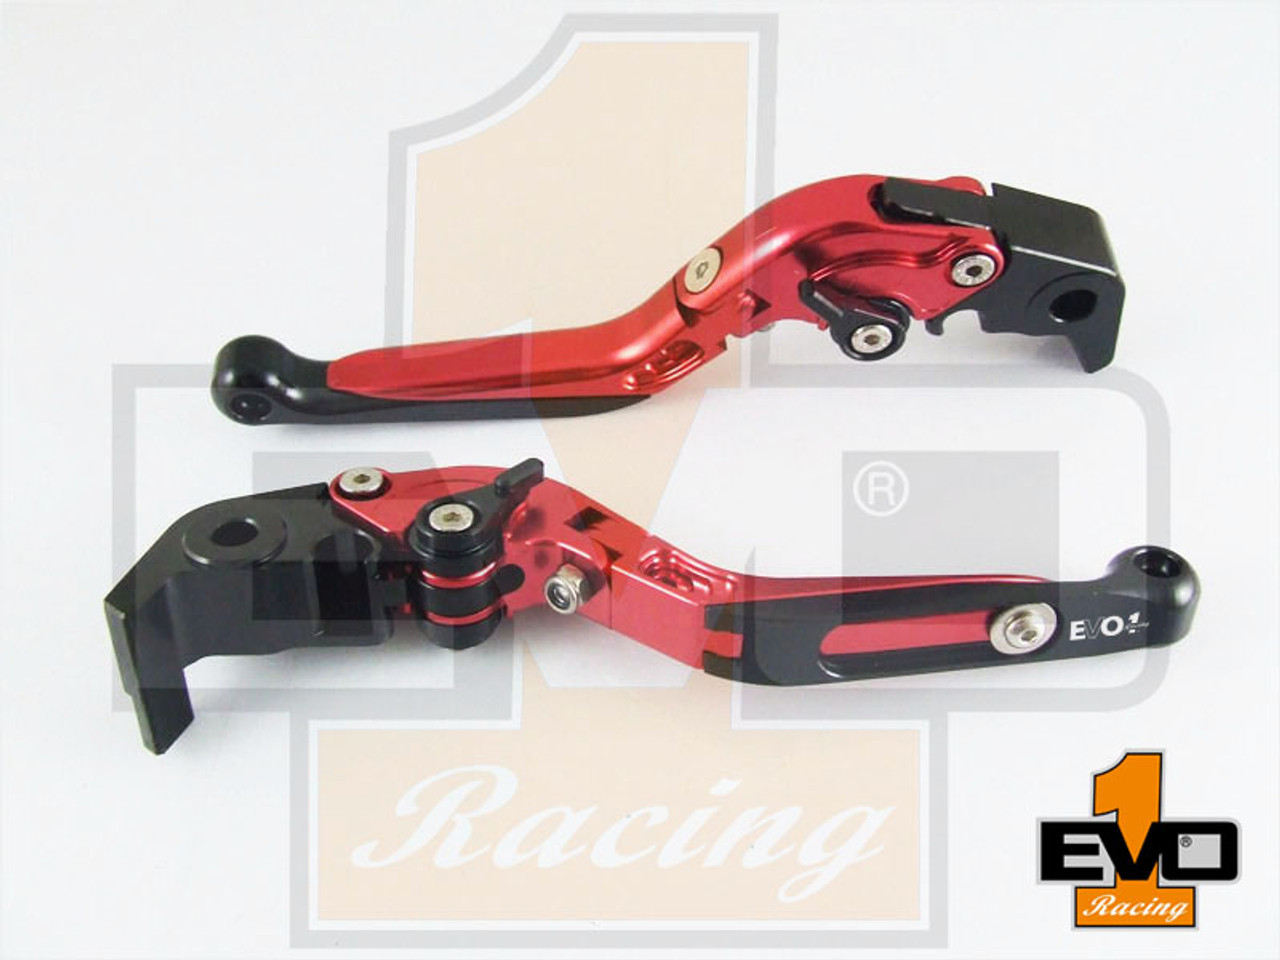 Honda RC51 / RVT1000 SP-1/SP-2 Brake & Clutch Fold & Extend Levers - Red